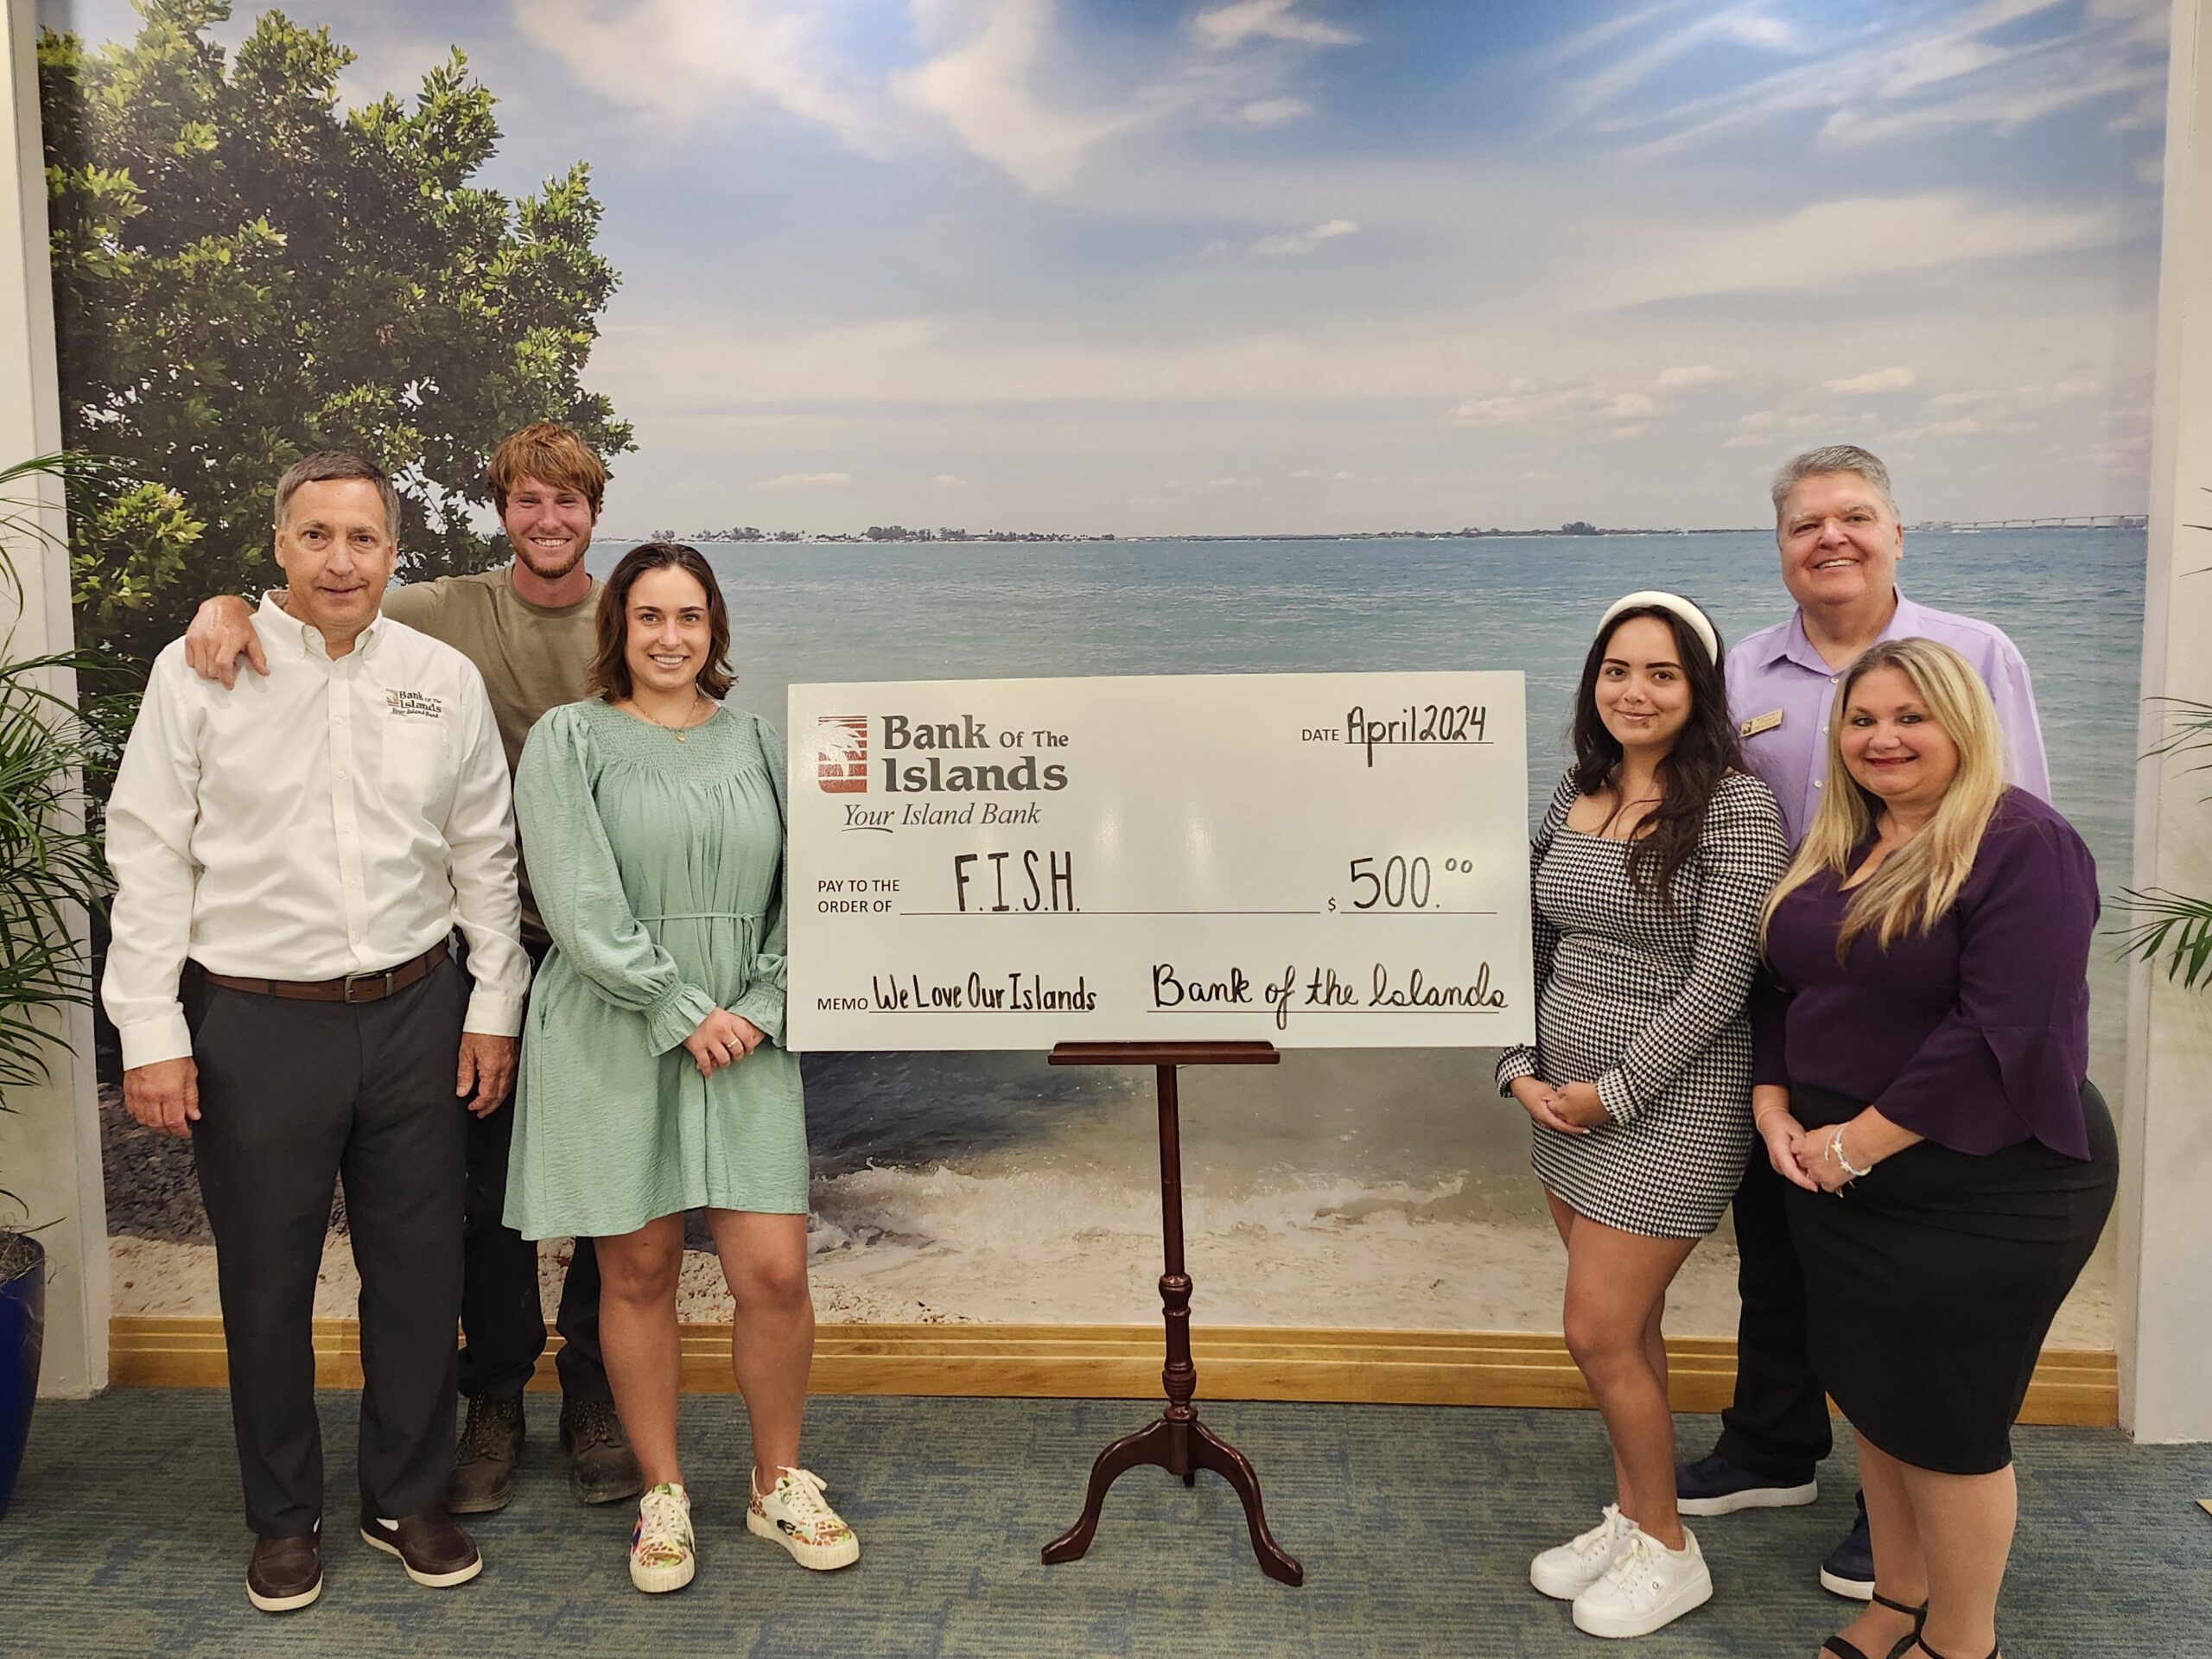 Bank of the Islands donates to F.I.S.H.